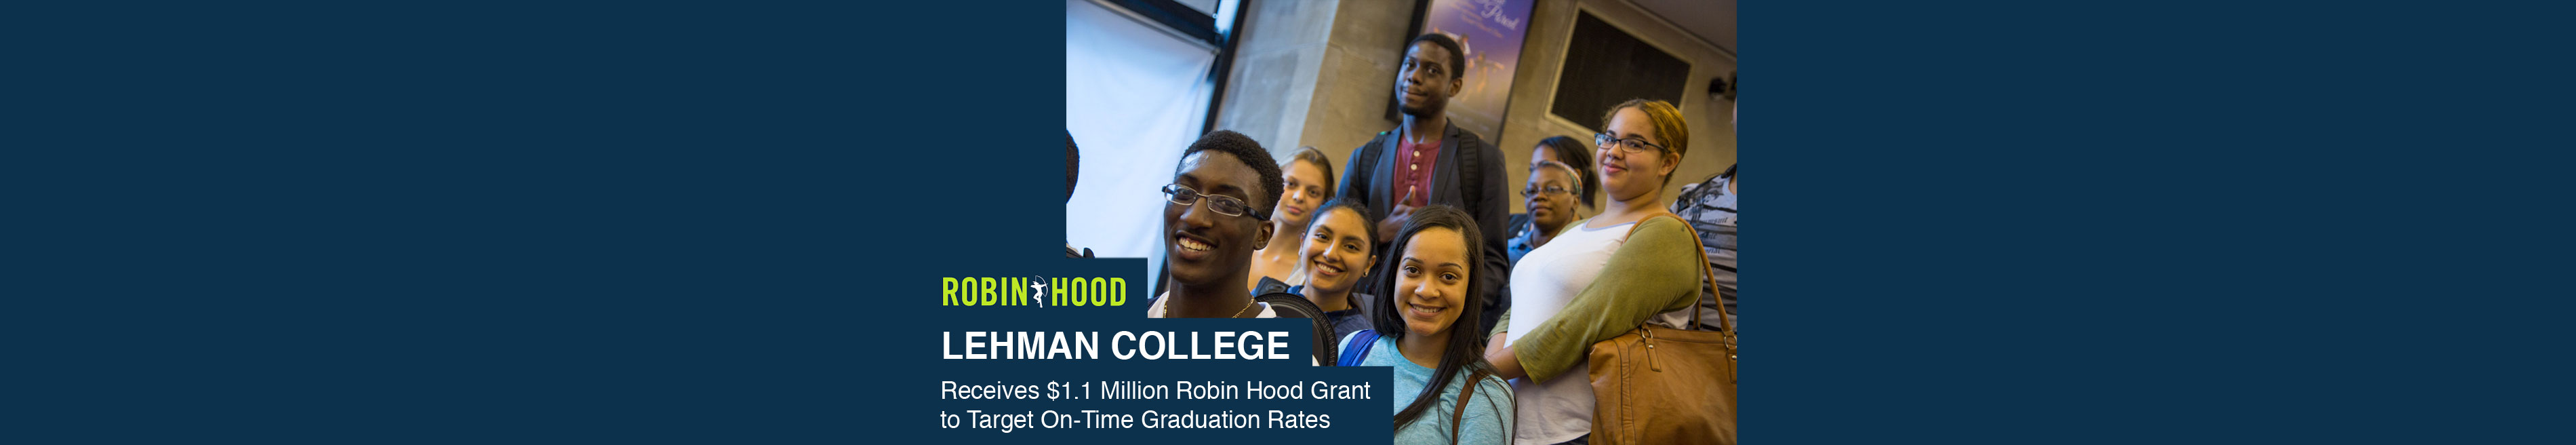 Lehman College Receives Robin Hood Grant to Target On-Time Graduation Rates